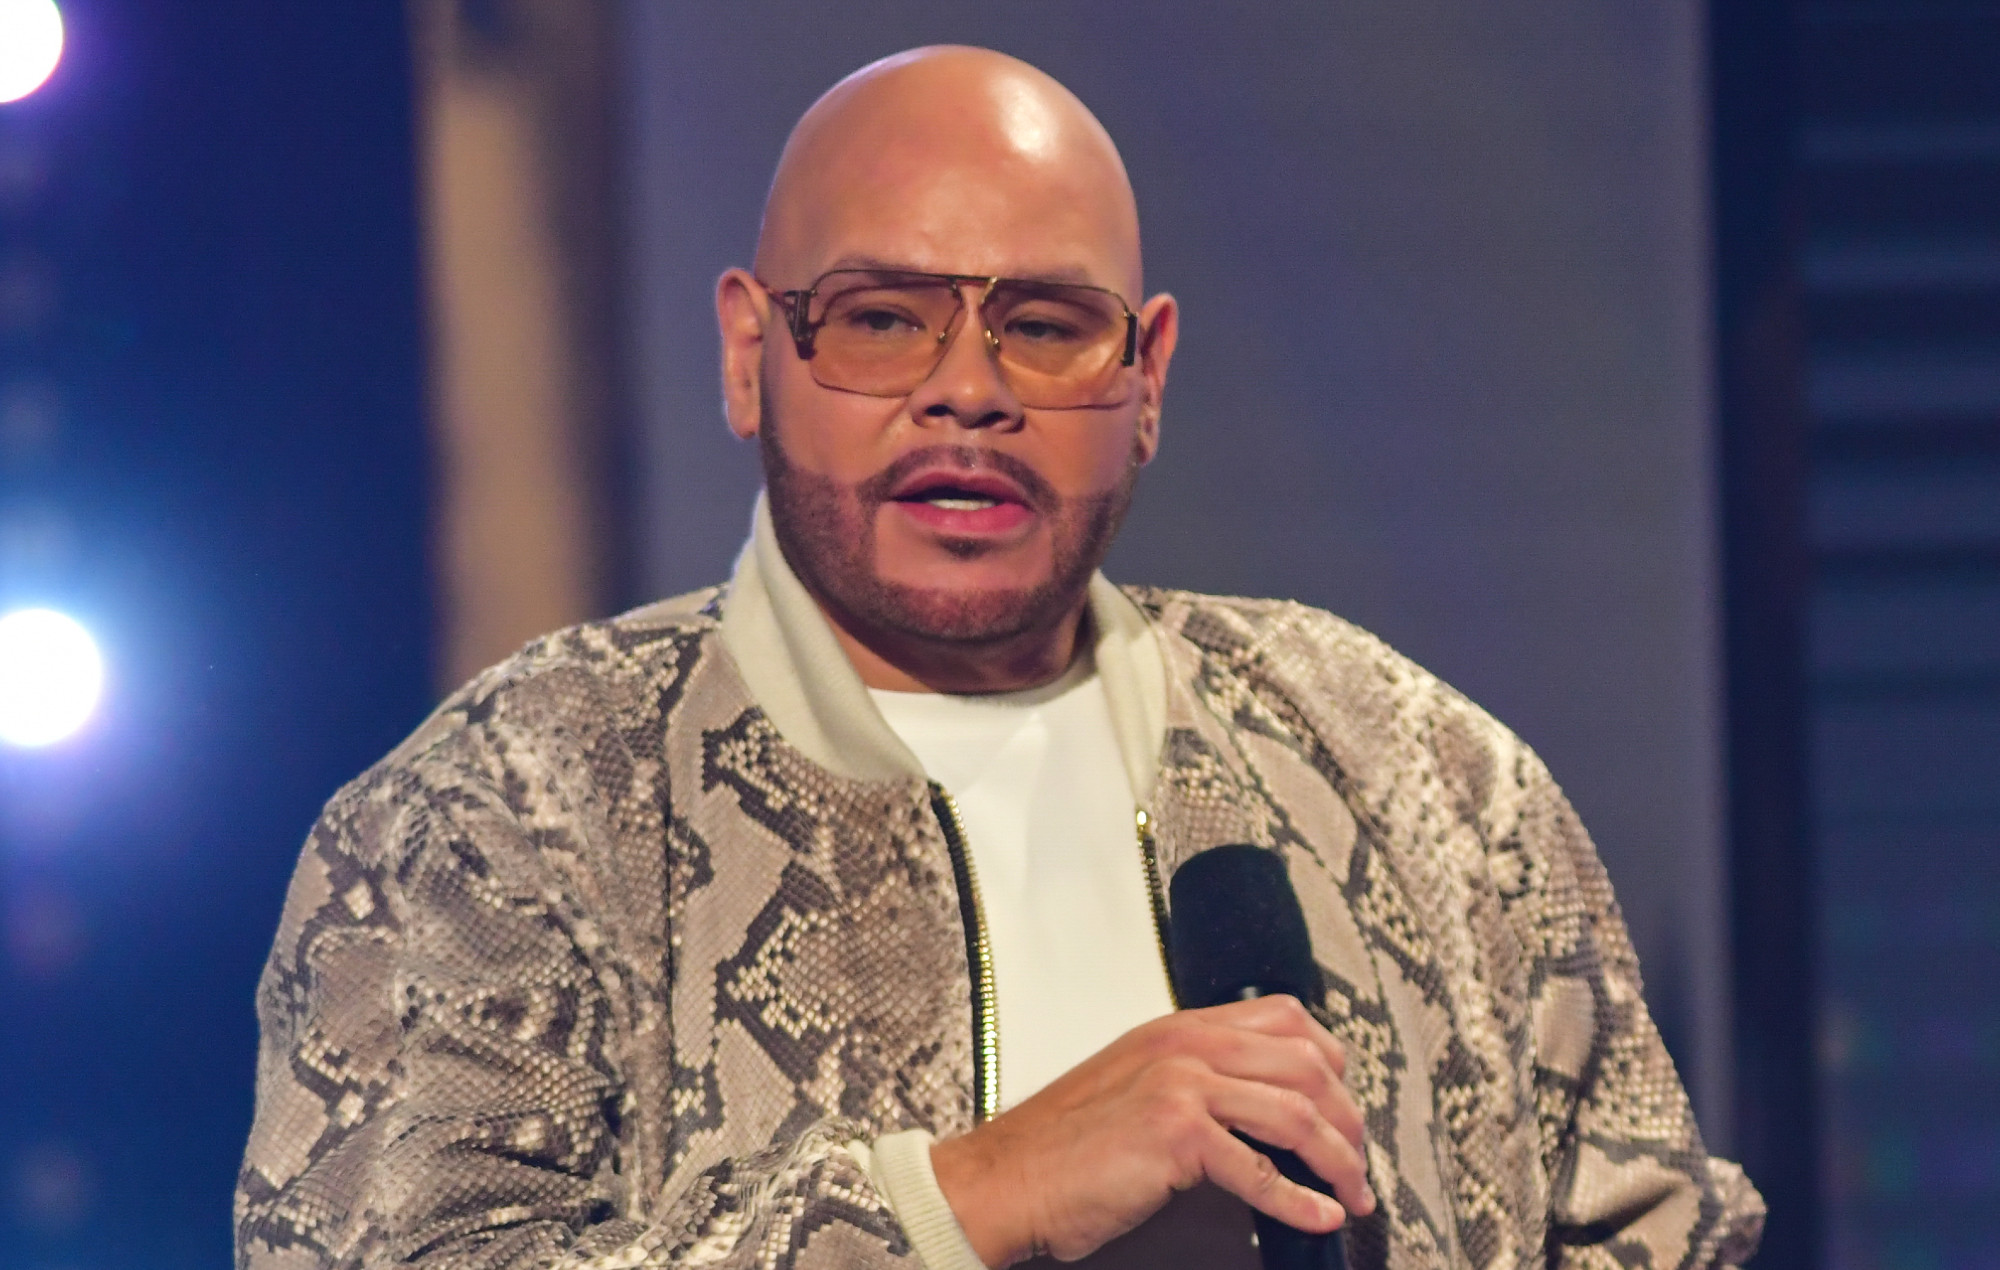 Fat Joe says he is “blessed by God” and not in the Illuminati